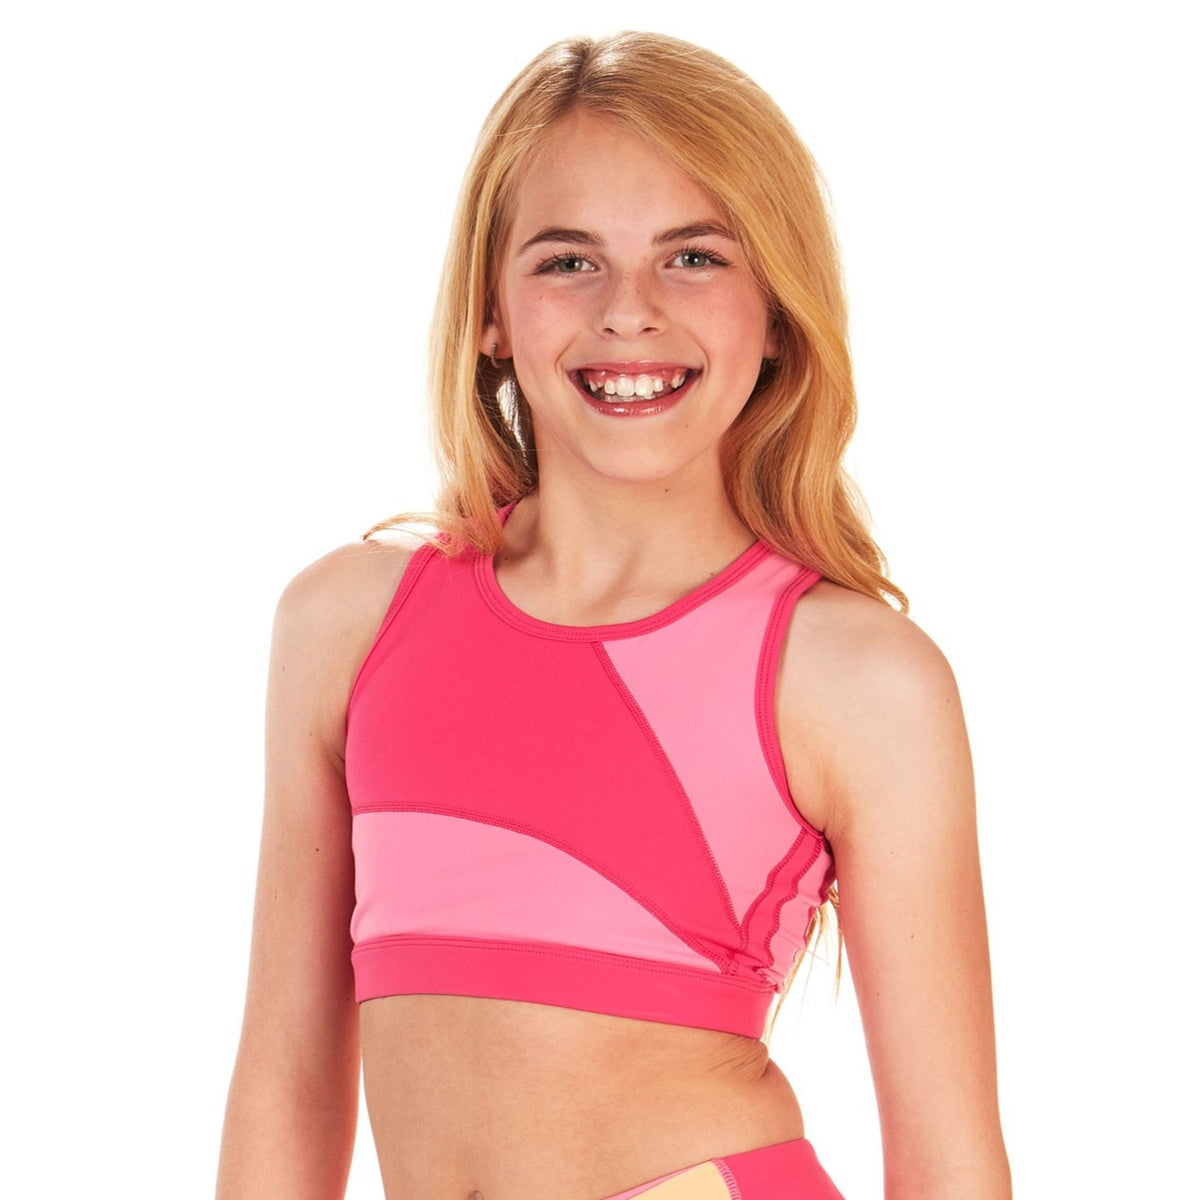 Teenager Bra- Buy Sports Bra for Young Girls